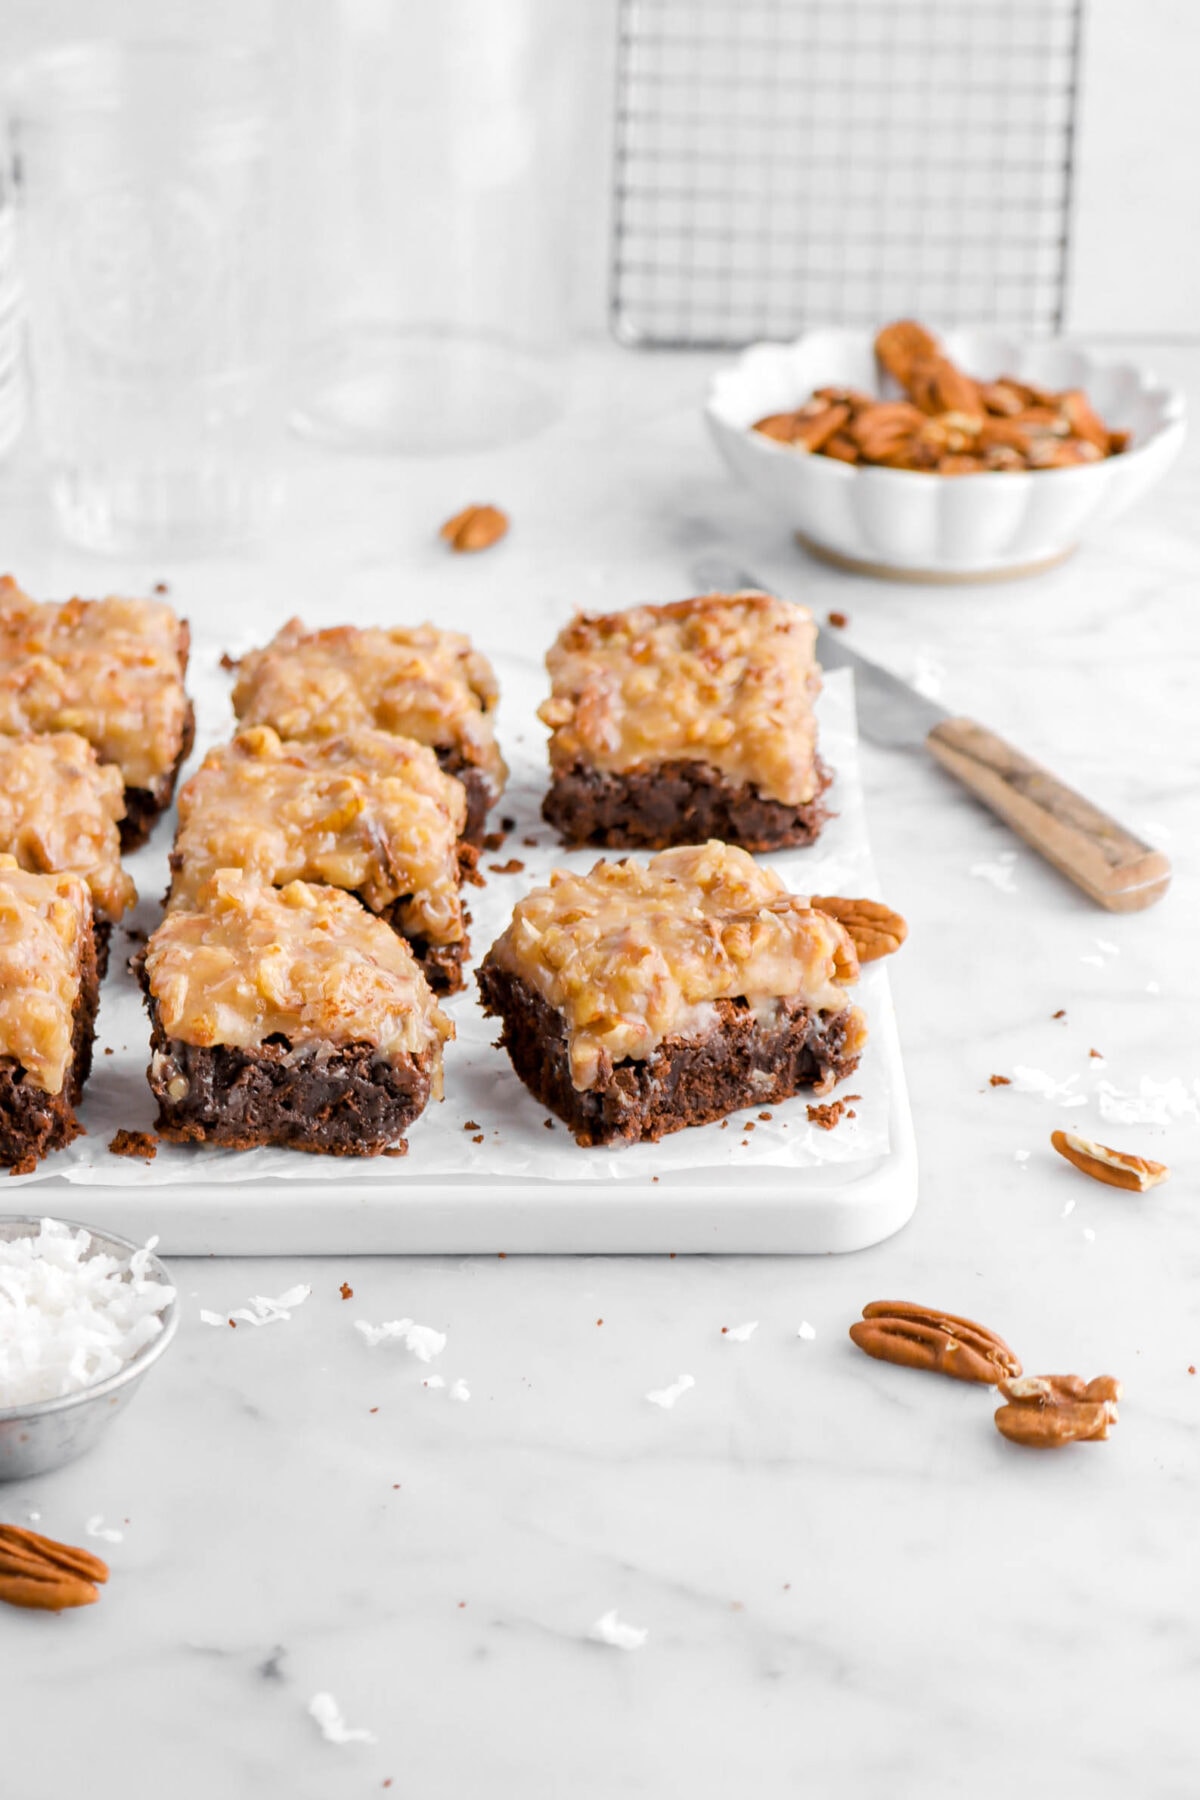 eight german chocolate brownies on parchment paper lined white tray with pecans and shredded coconut around on marble surface, with a wooden handled knife and bowl of pecans behind.